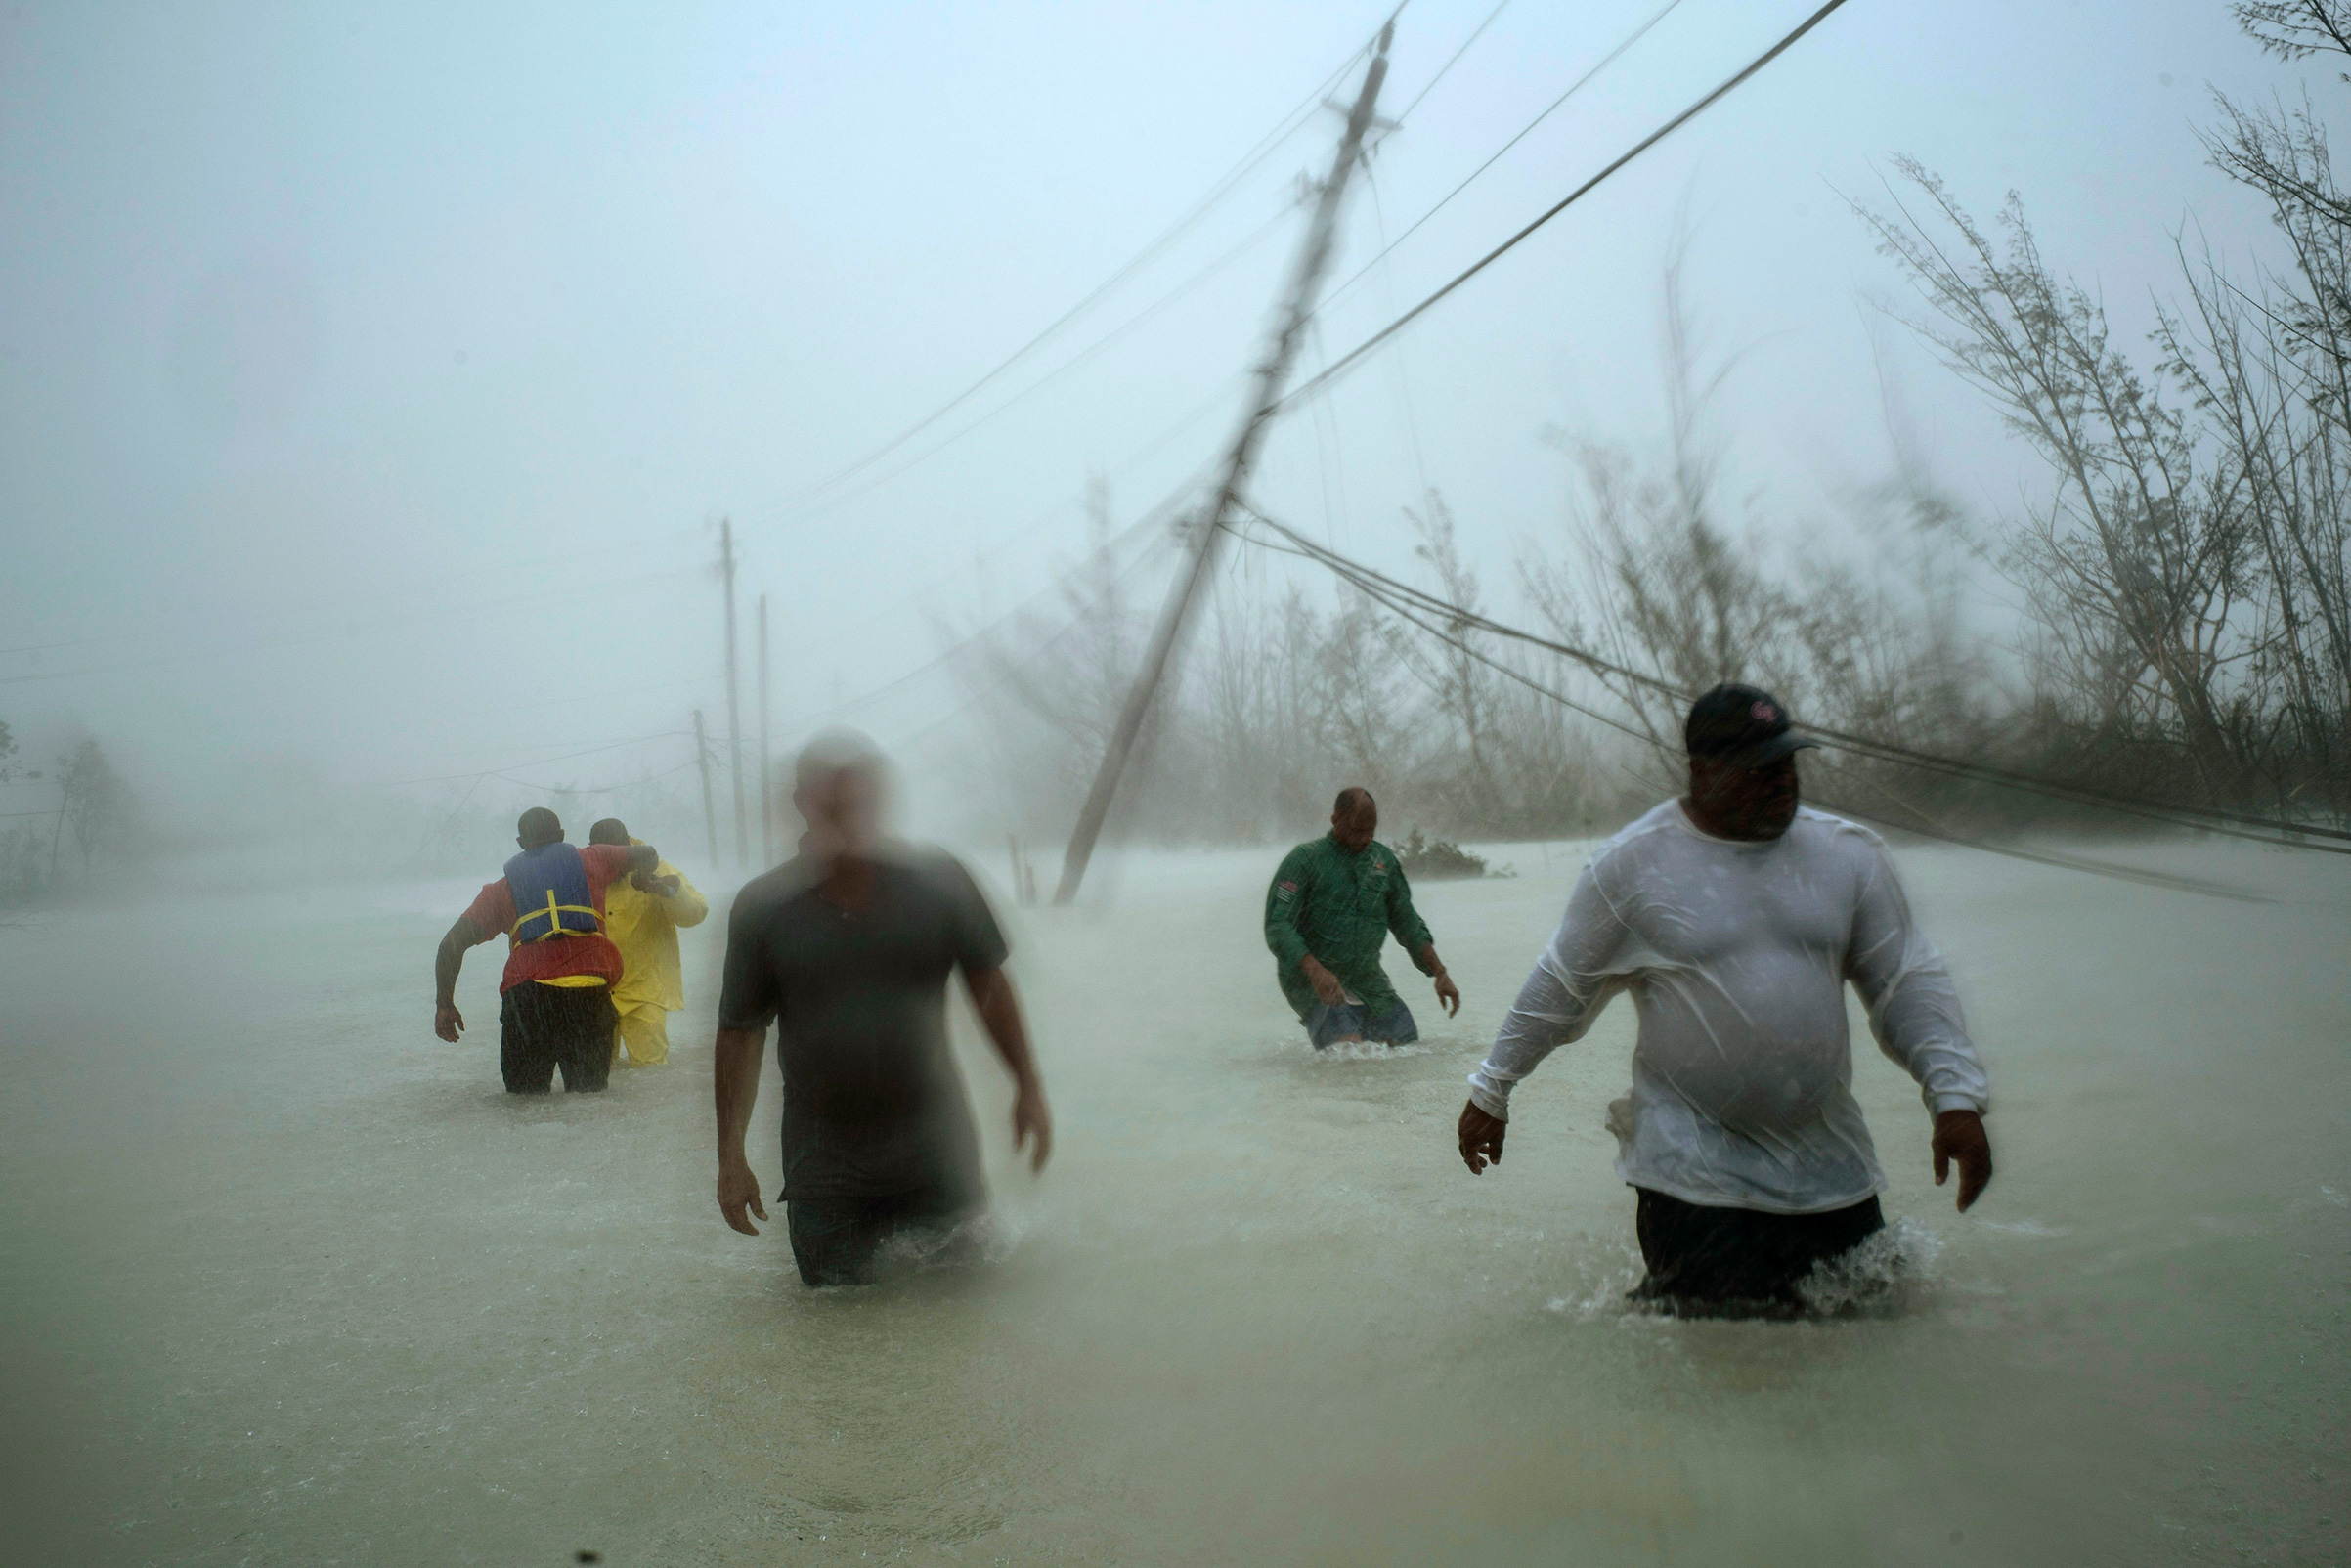 Volunteers wade through a flooded road against wind and rain caused by Hurricane Dorian to rescue families near the Causarina bridge in Freeport, Grand Bahama, Bahamas, Sept. 3, 2019. The storm's winds and muddy floodwaters devastated thousands of homes, crippled hospitals and trapped people in attics. (Ramon Espinosa—AP)